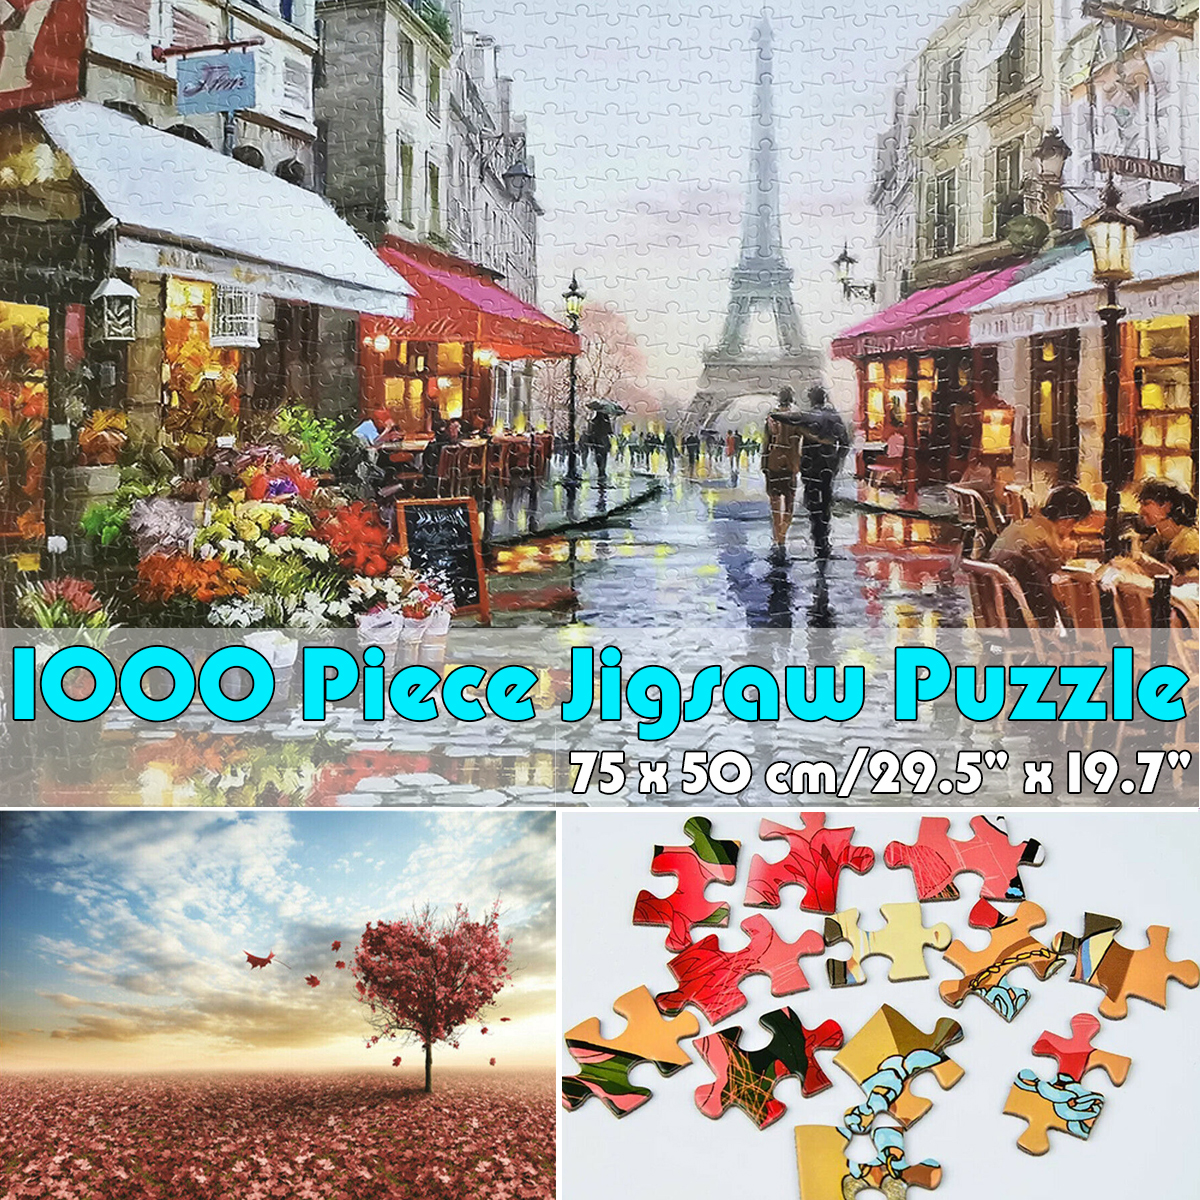 1000-Piece-Jigsaw-Puzzle-Toy-DIY-Assembly-Cardboard-Landscapes-Decompression-Game-Puzzle-Toy-1678197-1